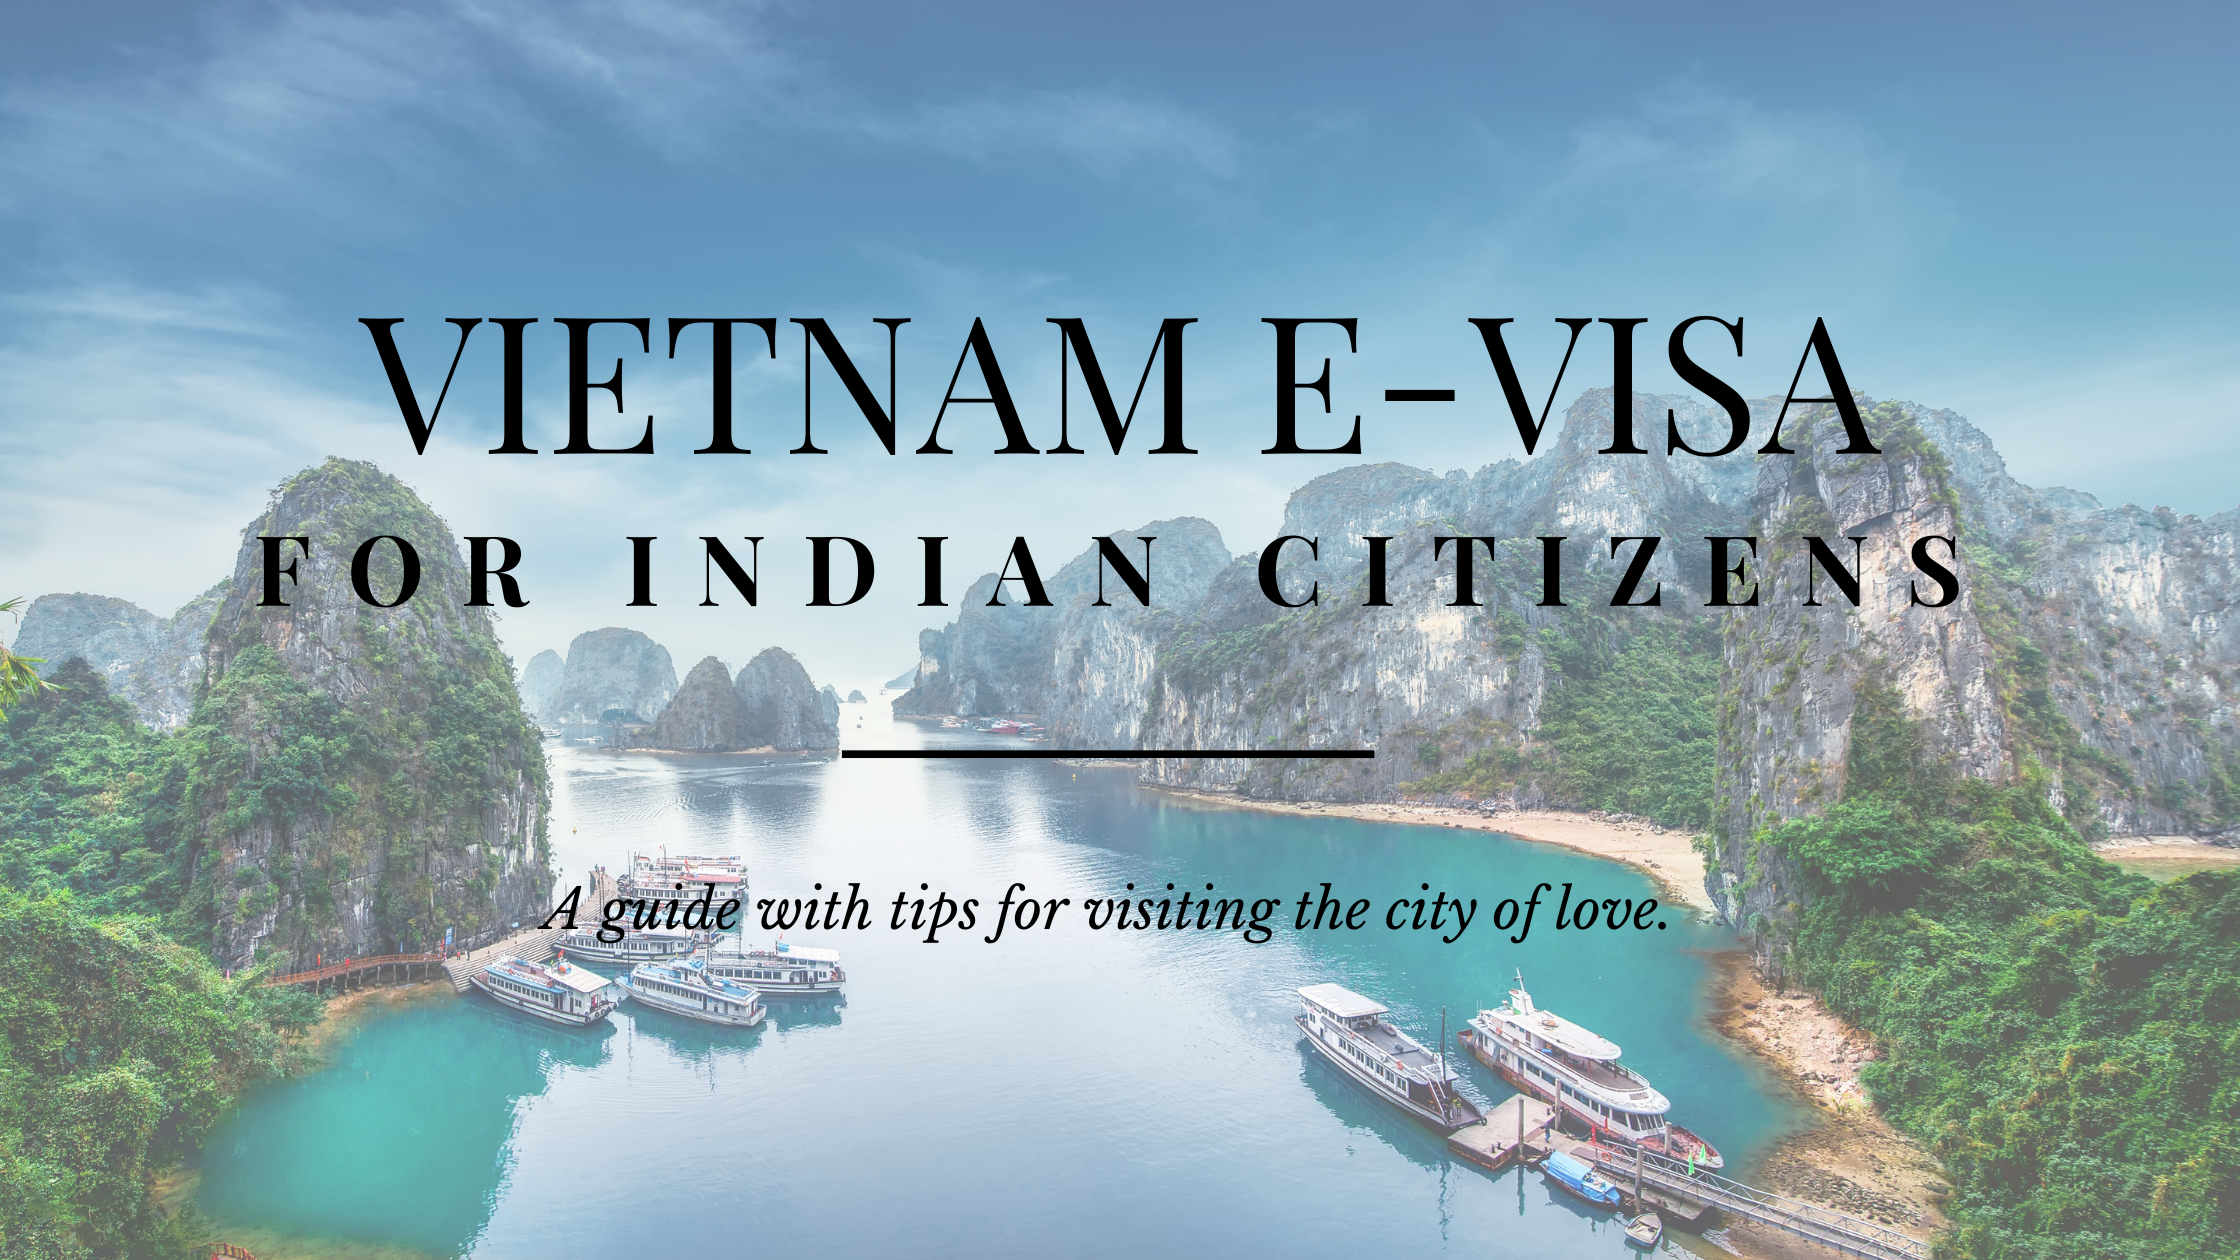 Vietname-visa-for-Indian-citizens